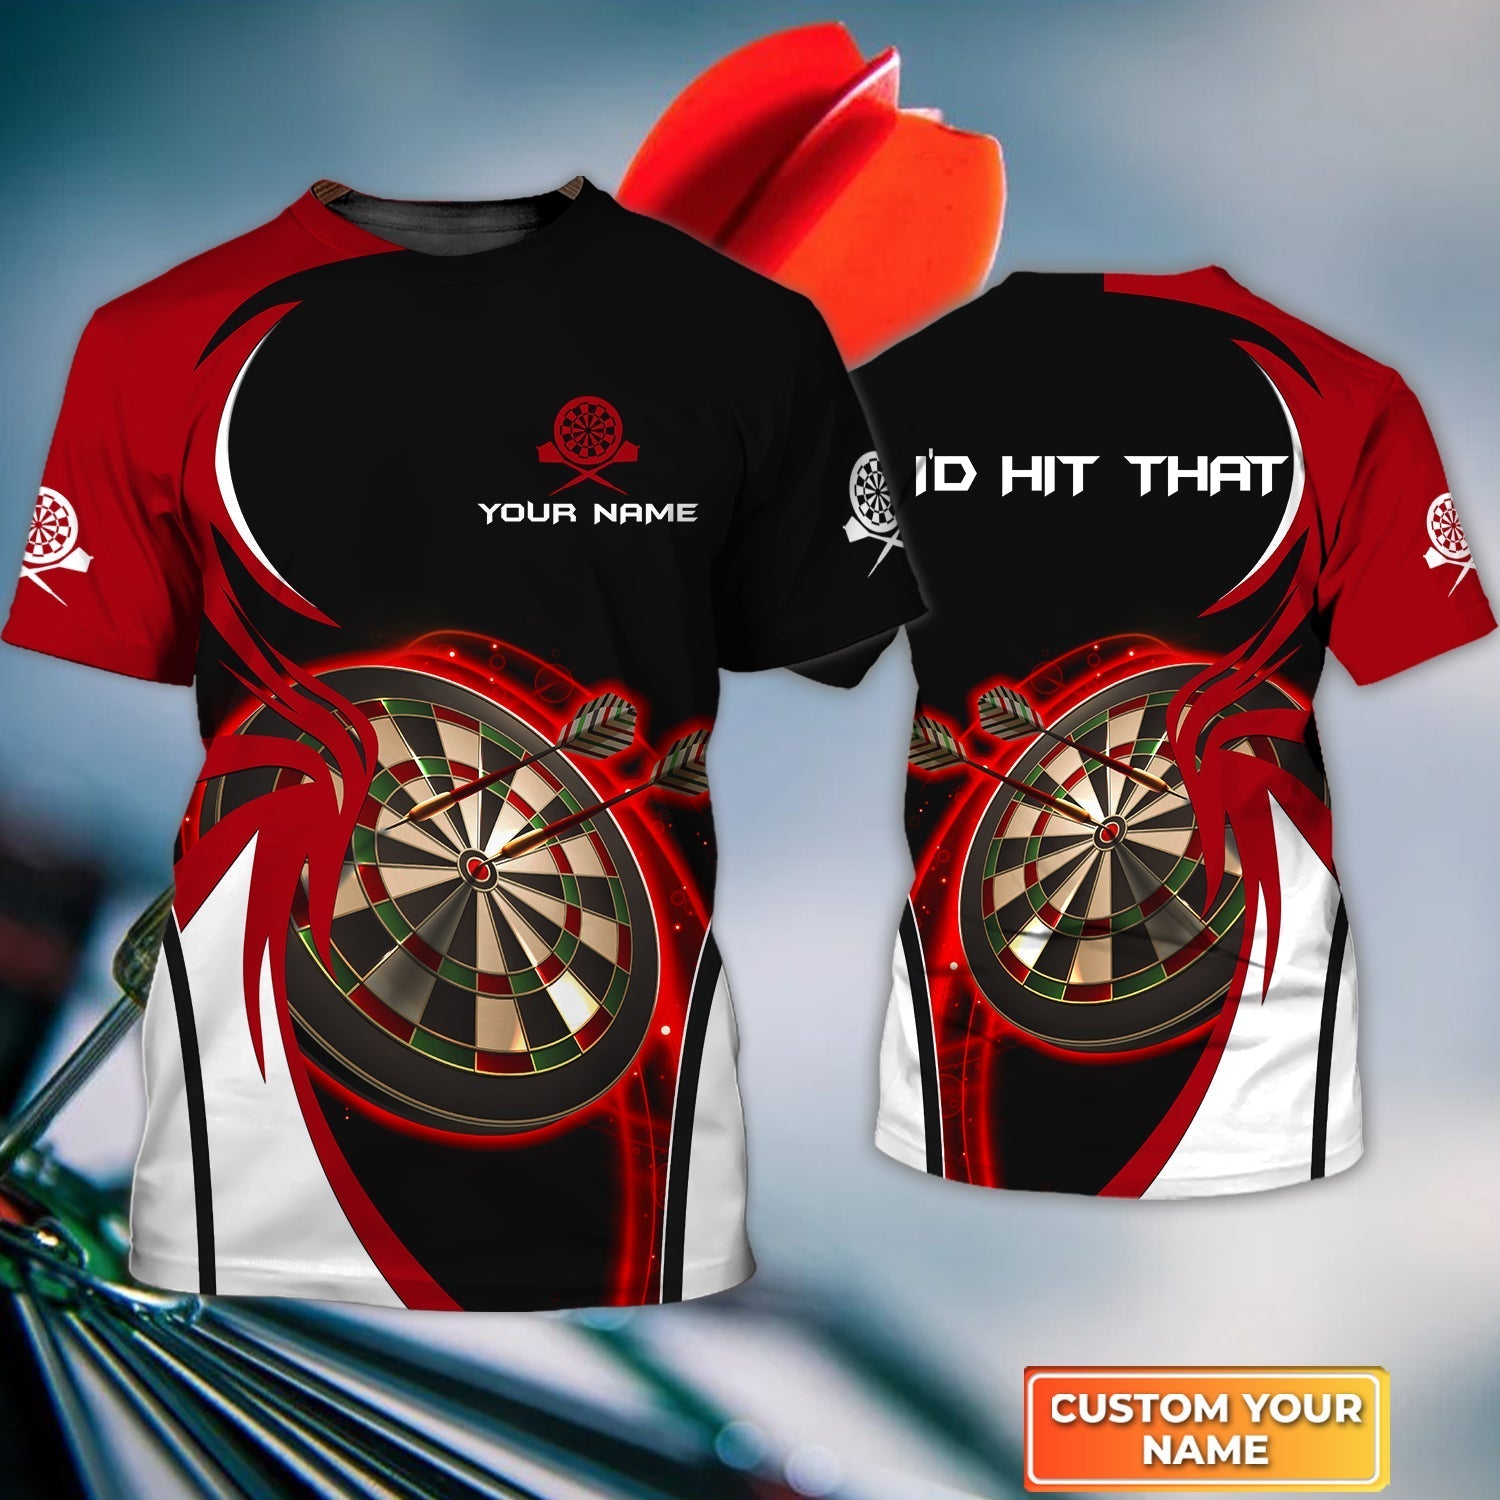 My Drinking Team Has A Darts Problem, Personalized Name 3D Tshirt For Darts Player – DT149